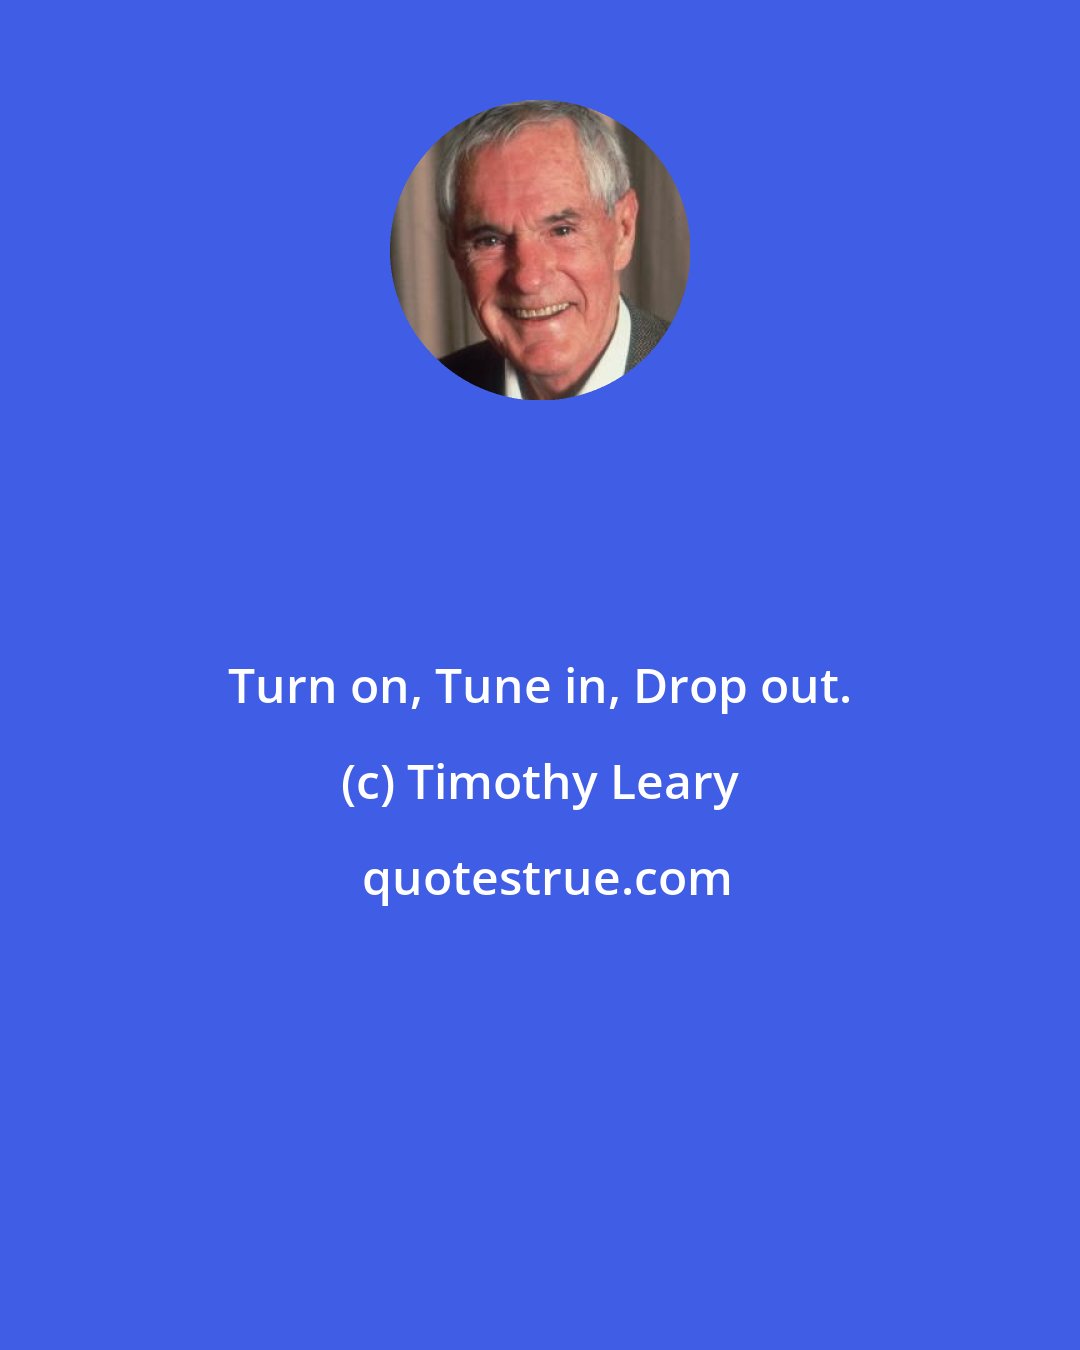 Timothy Leary: Turn on, Tune in, Drop out.